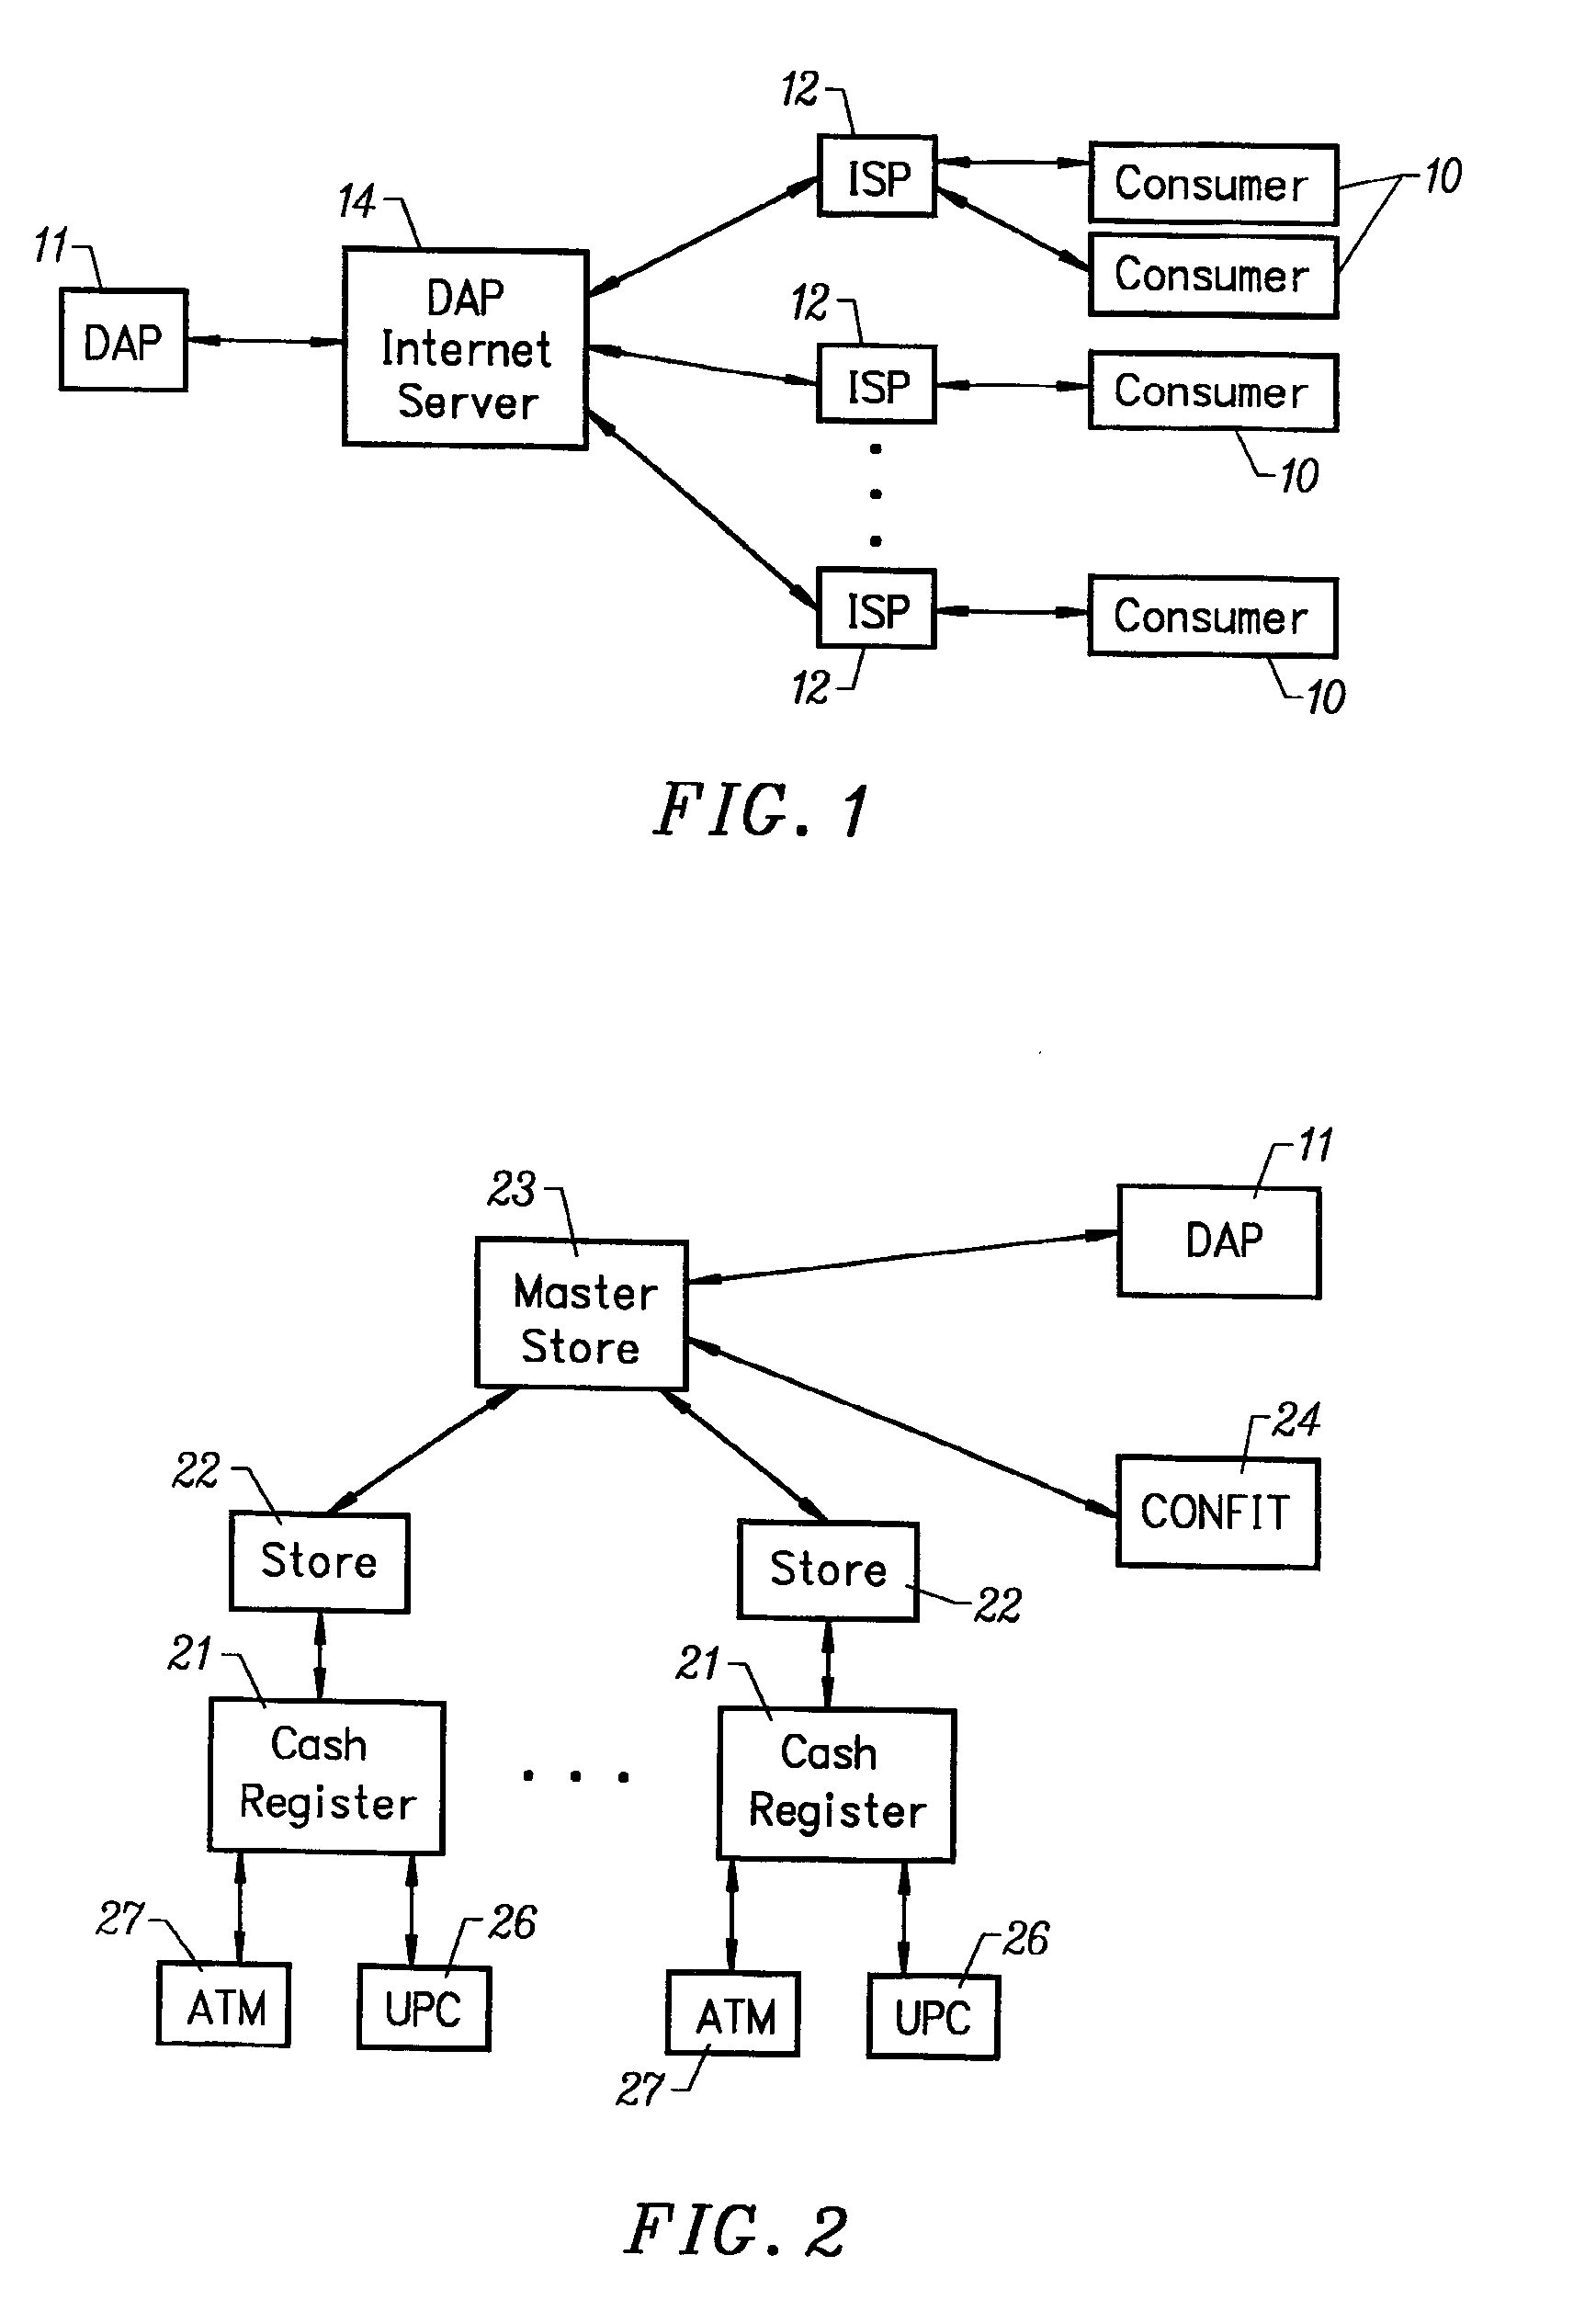 Method and system for distributing and reconciling electronic promotions